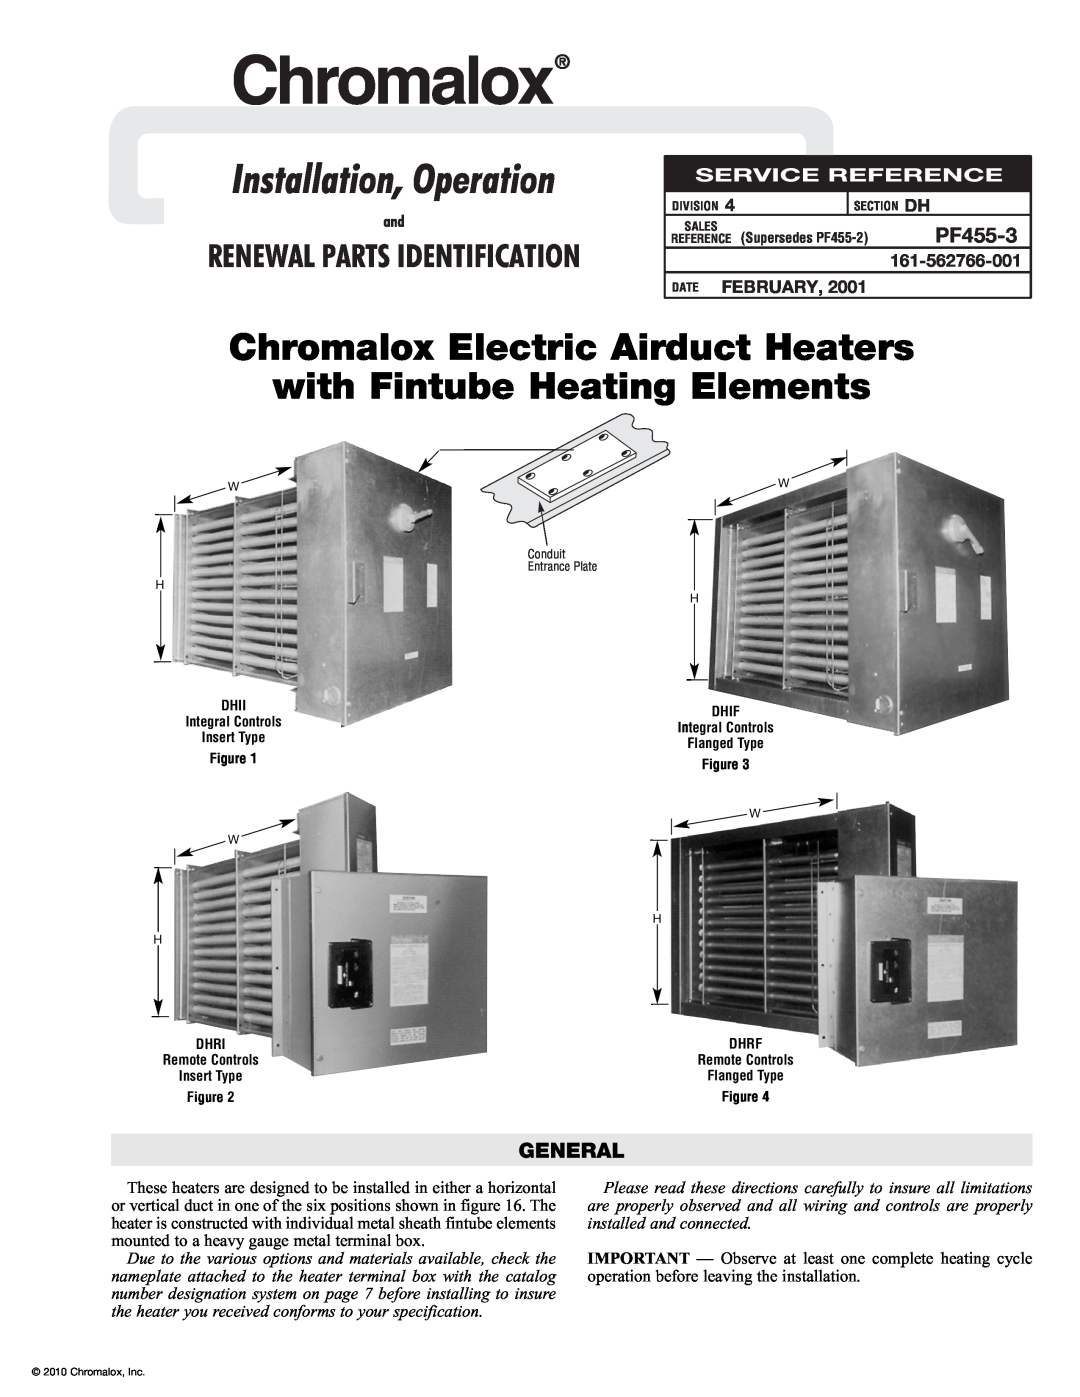 Chromalox PF455-3 manual General, 161-562766-001, Date February, Chromalox Electric Airduct Heaters, Division, Sales 